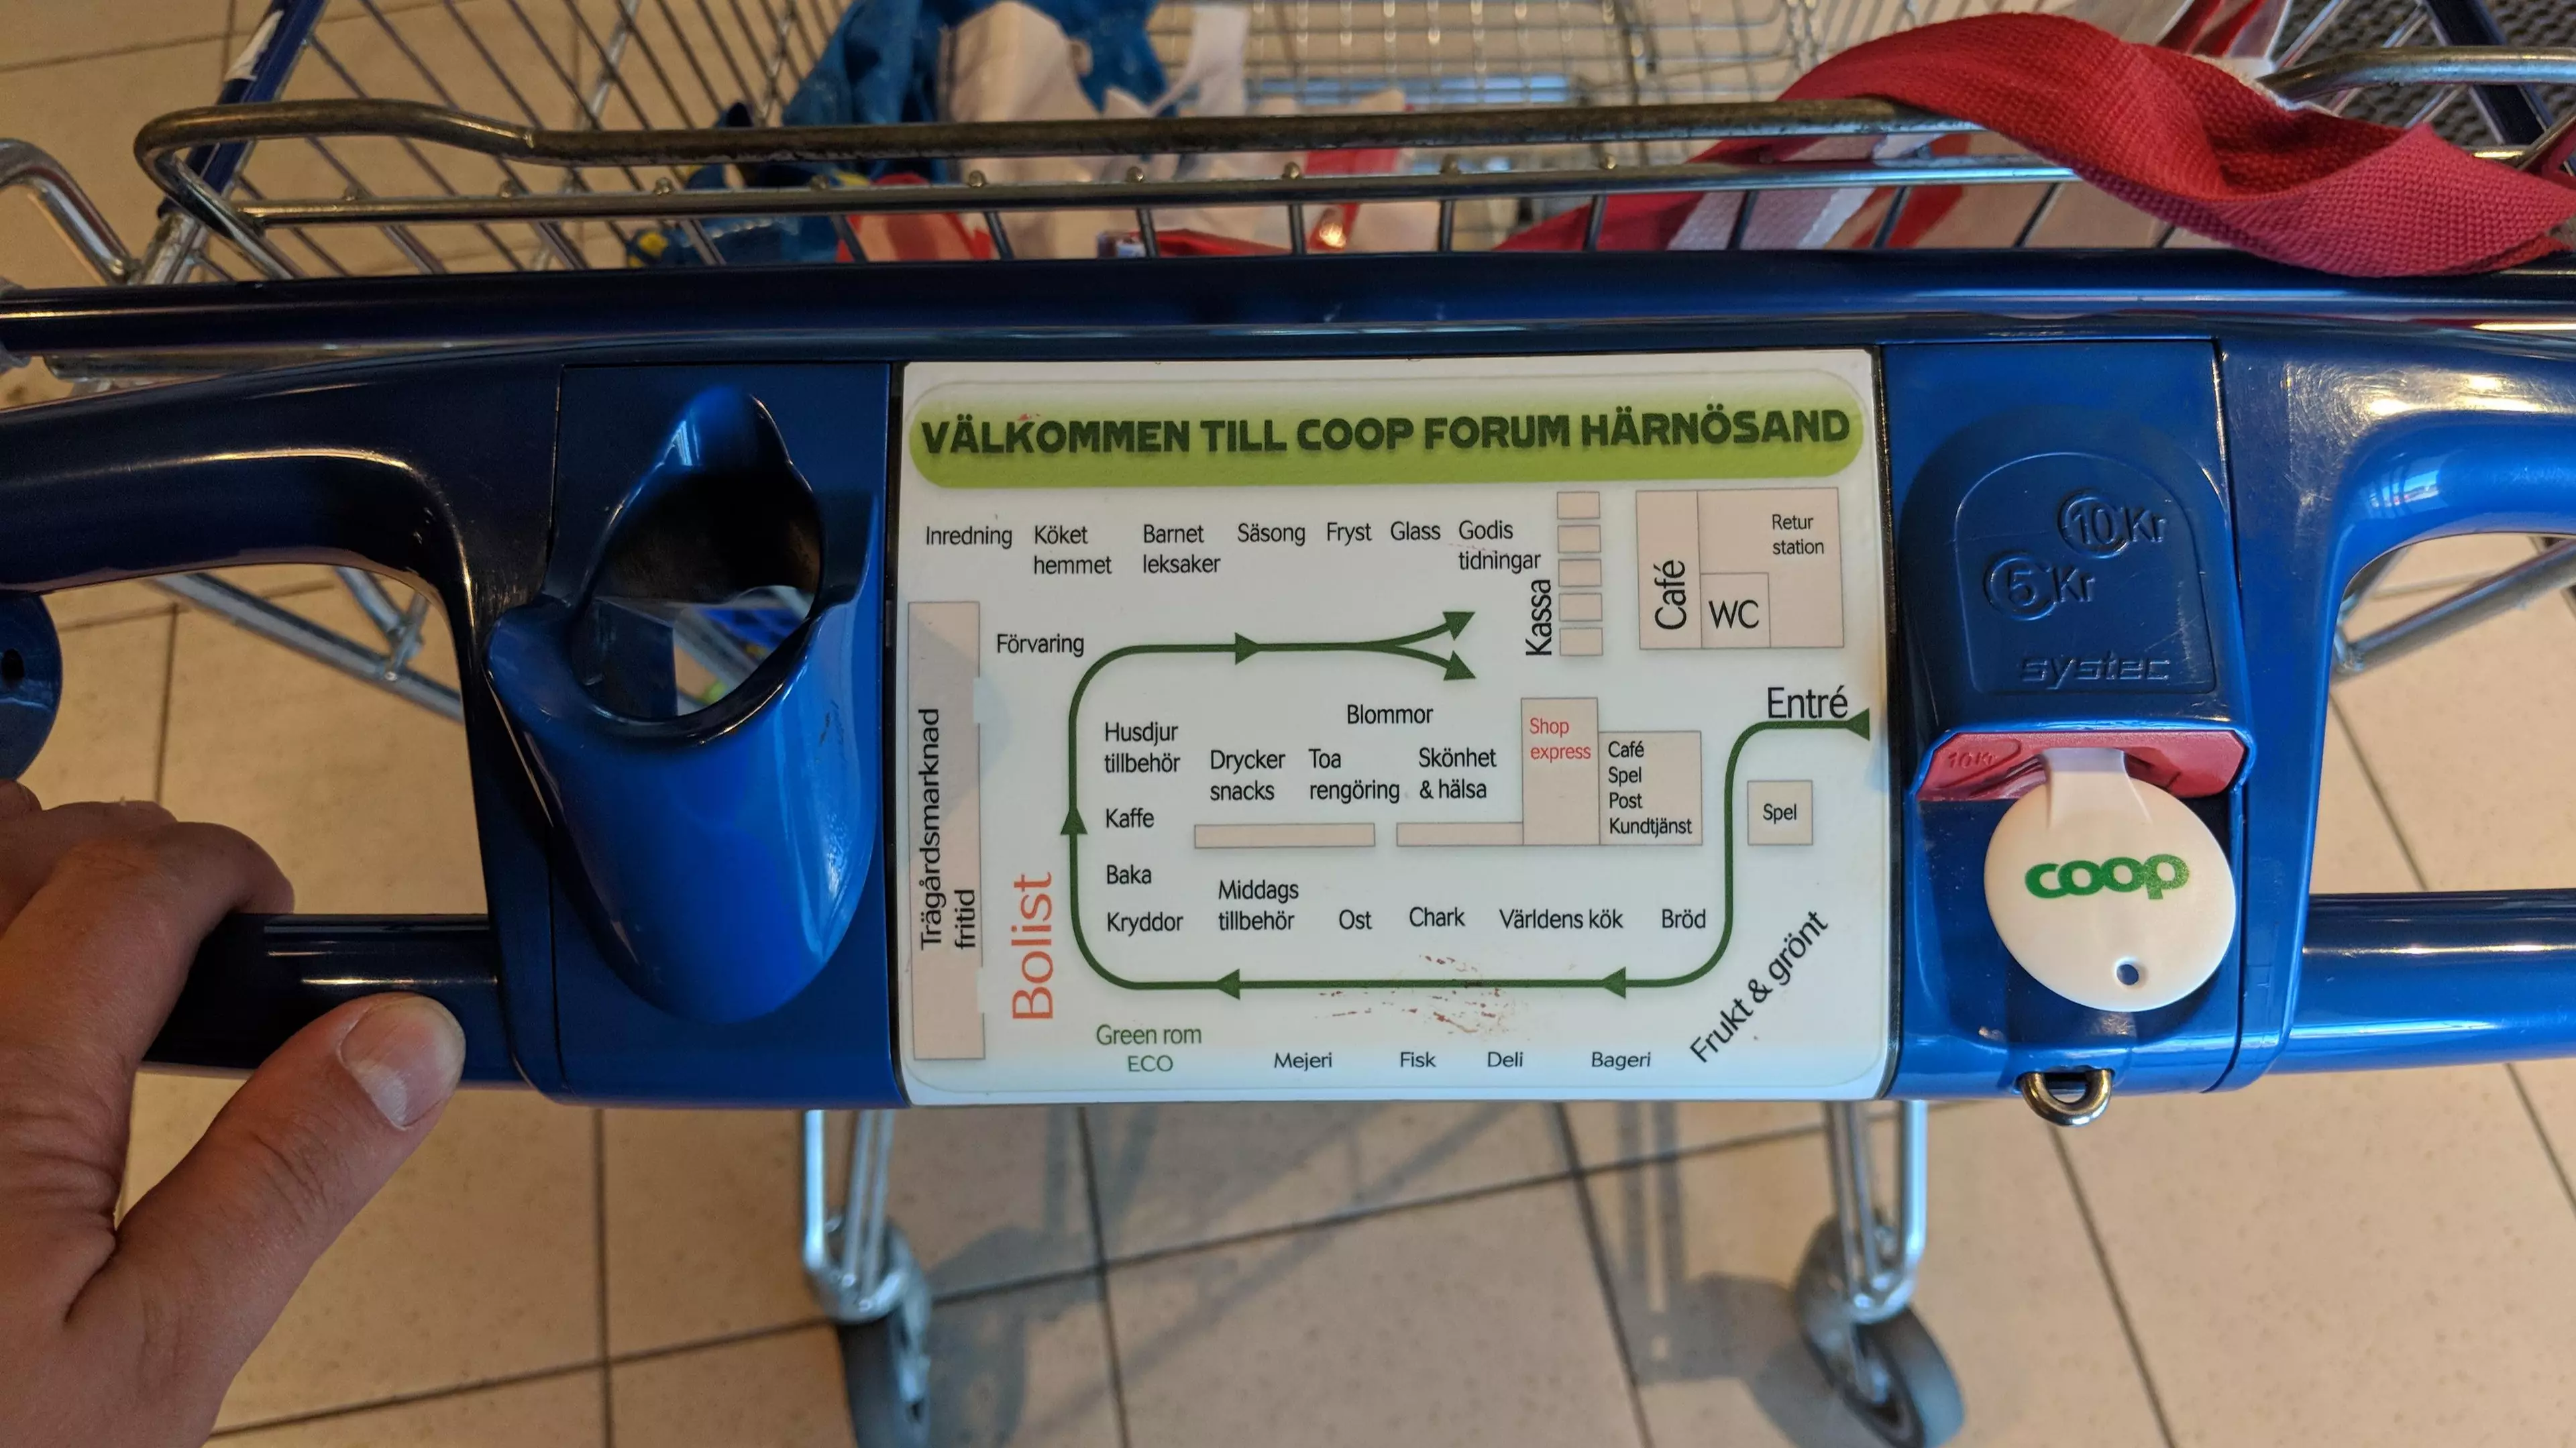 Supermarkets In Sweden Have Maps On Their Trolleys